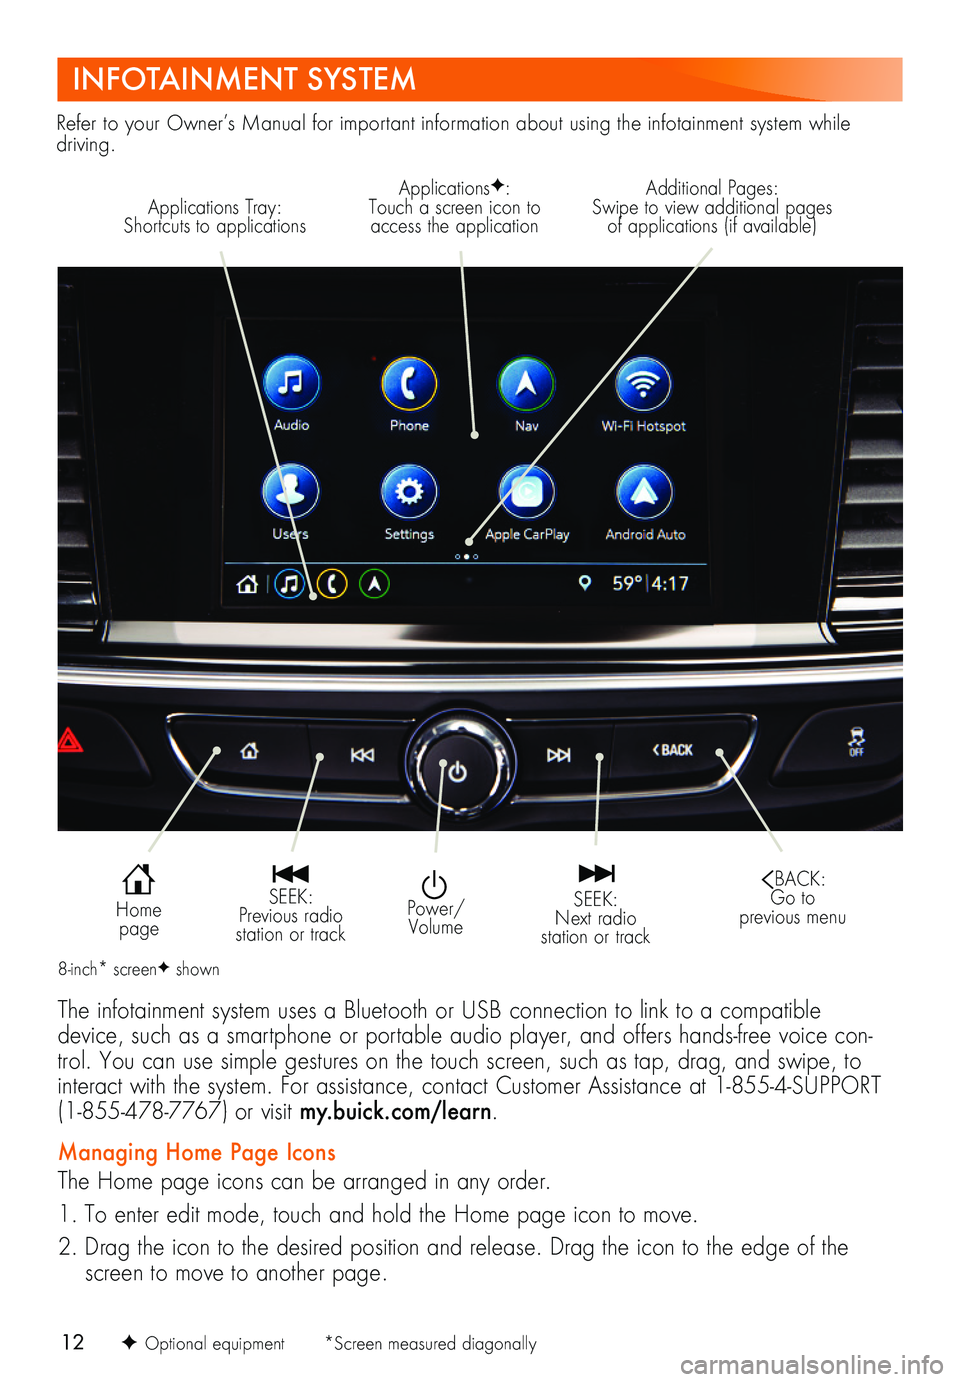 BUICK REGAL TOURX 2019  Get To Know Guide 12
INFOTAINMENT SYSTEM
F Optional equipment       *Screen measured diagonally
Refer to your Owner’s Manual for important information about using the infotainment system while driving.
ApplicationsF: